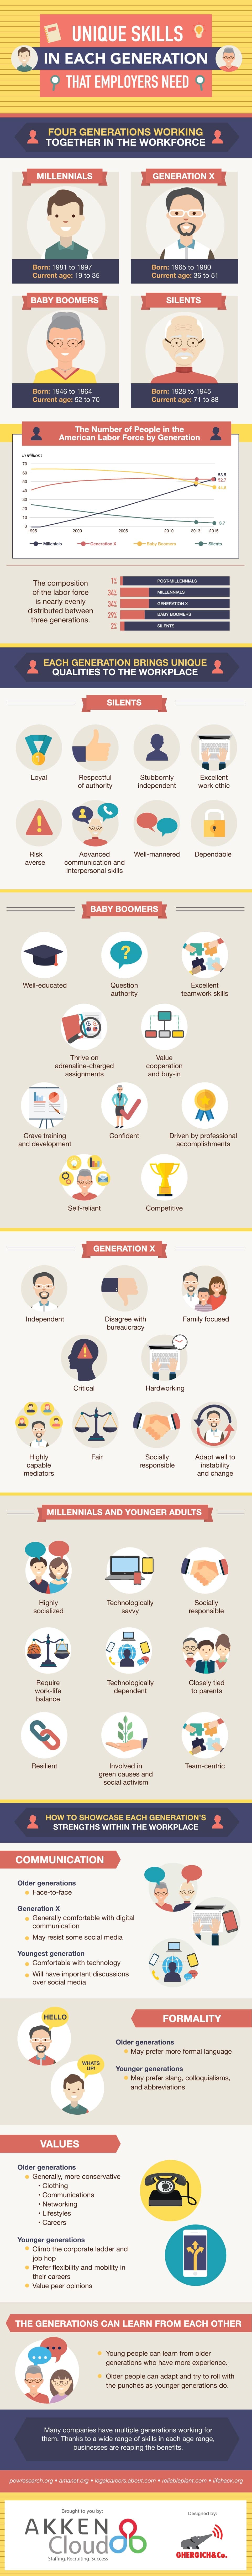 Unique Skills in Each Generation That Employers Need